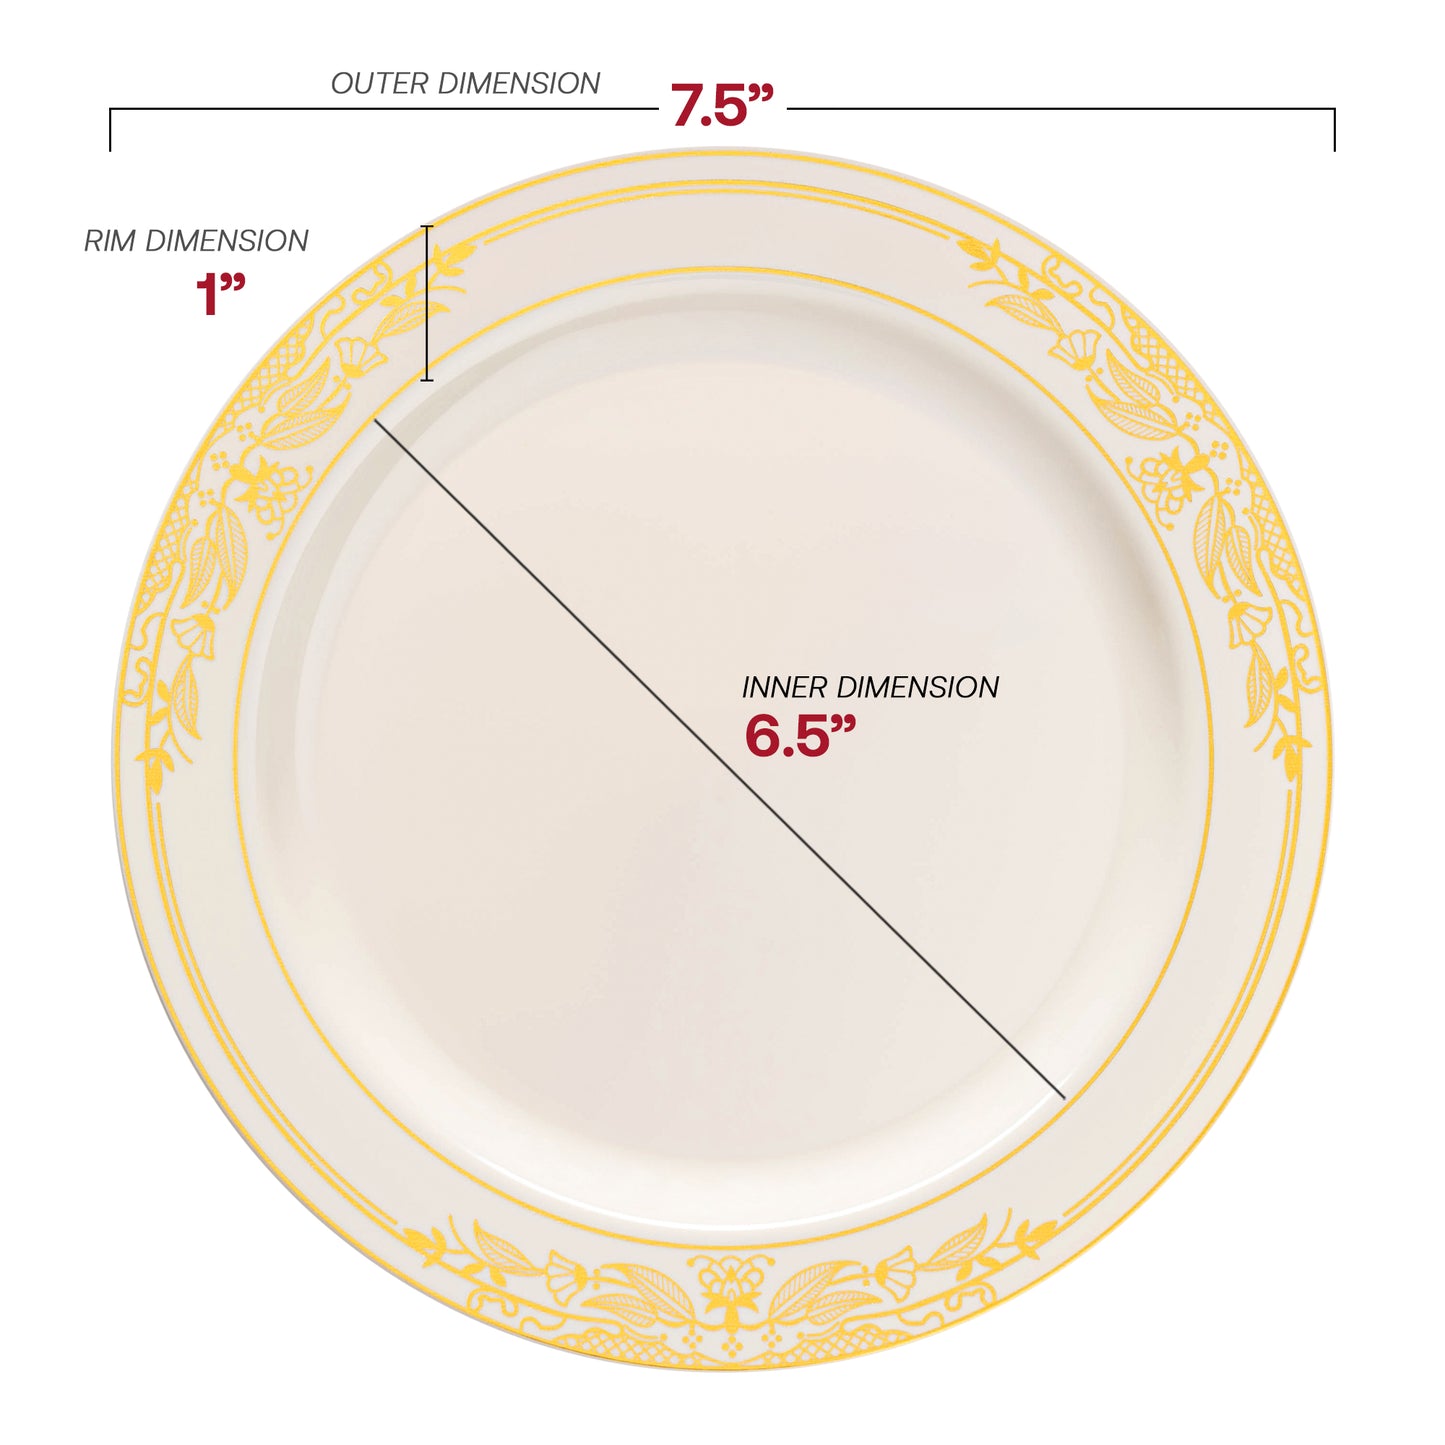 Ivory with Gold Harmony Rim Plastic Salad Plates (7.5") Dimension | The Kaya Collection